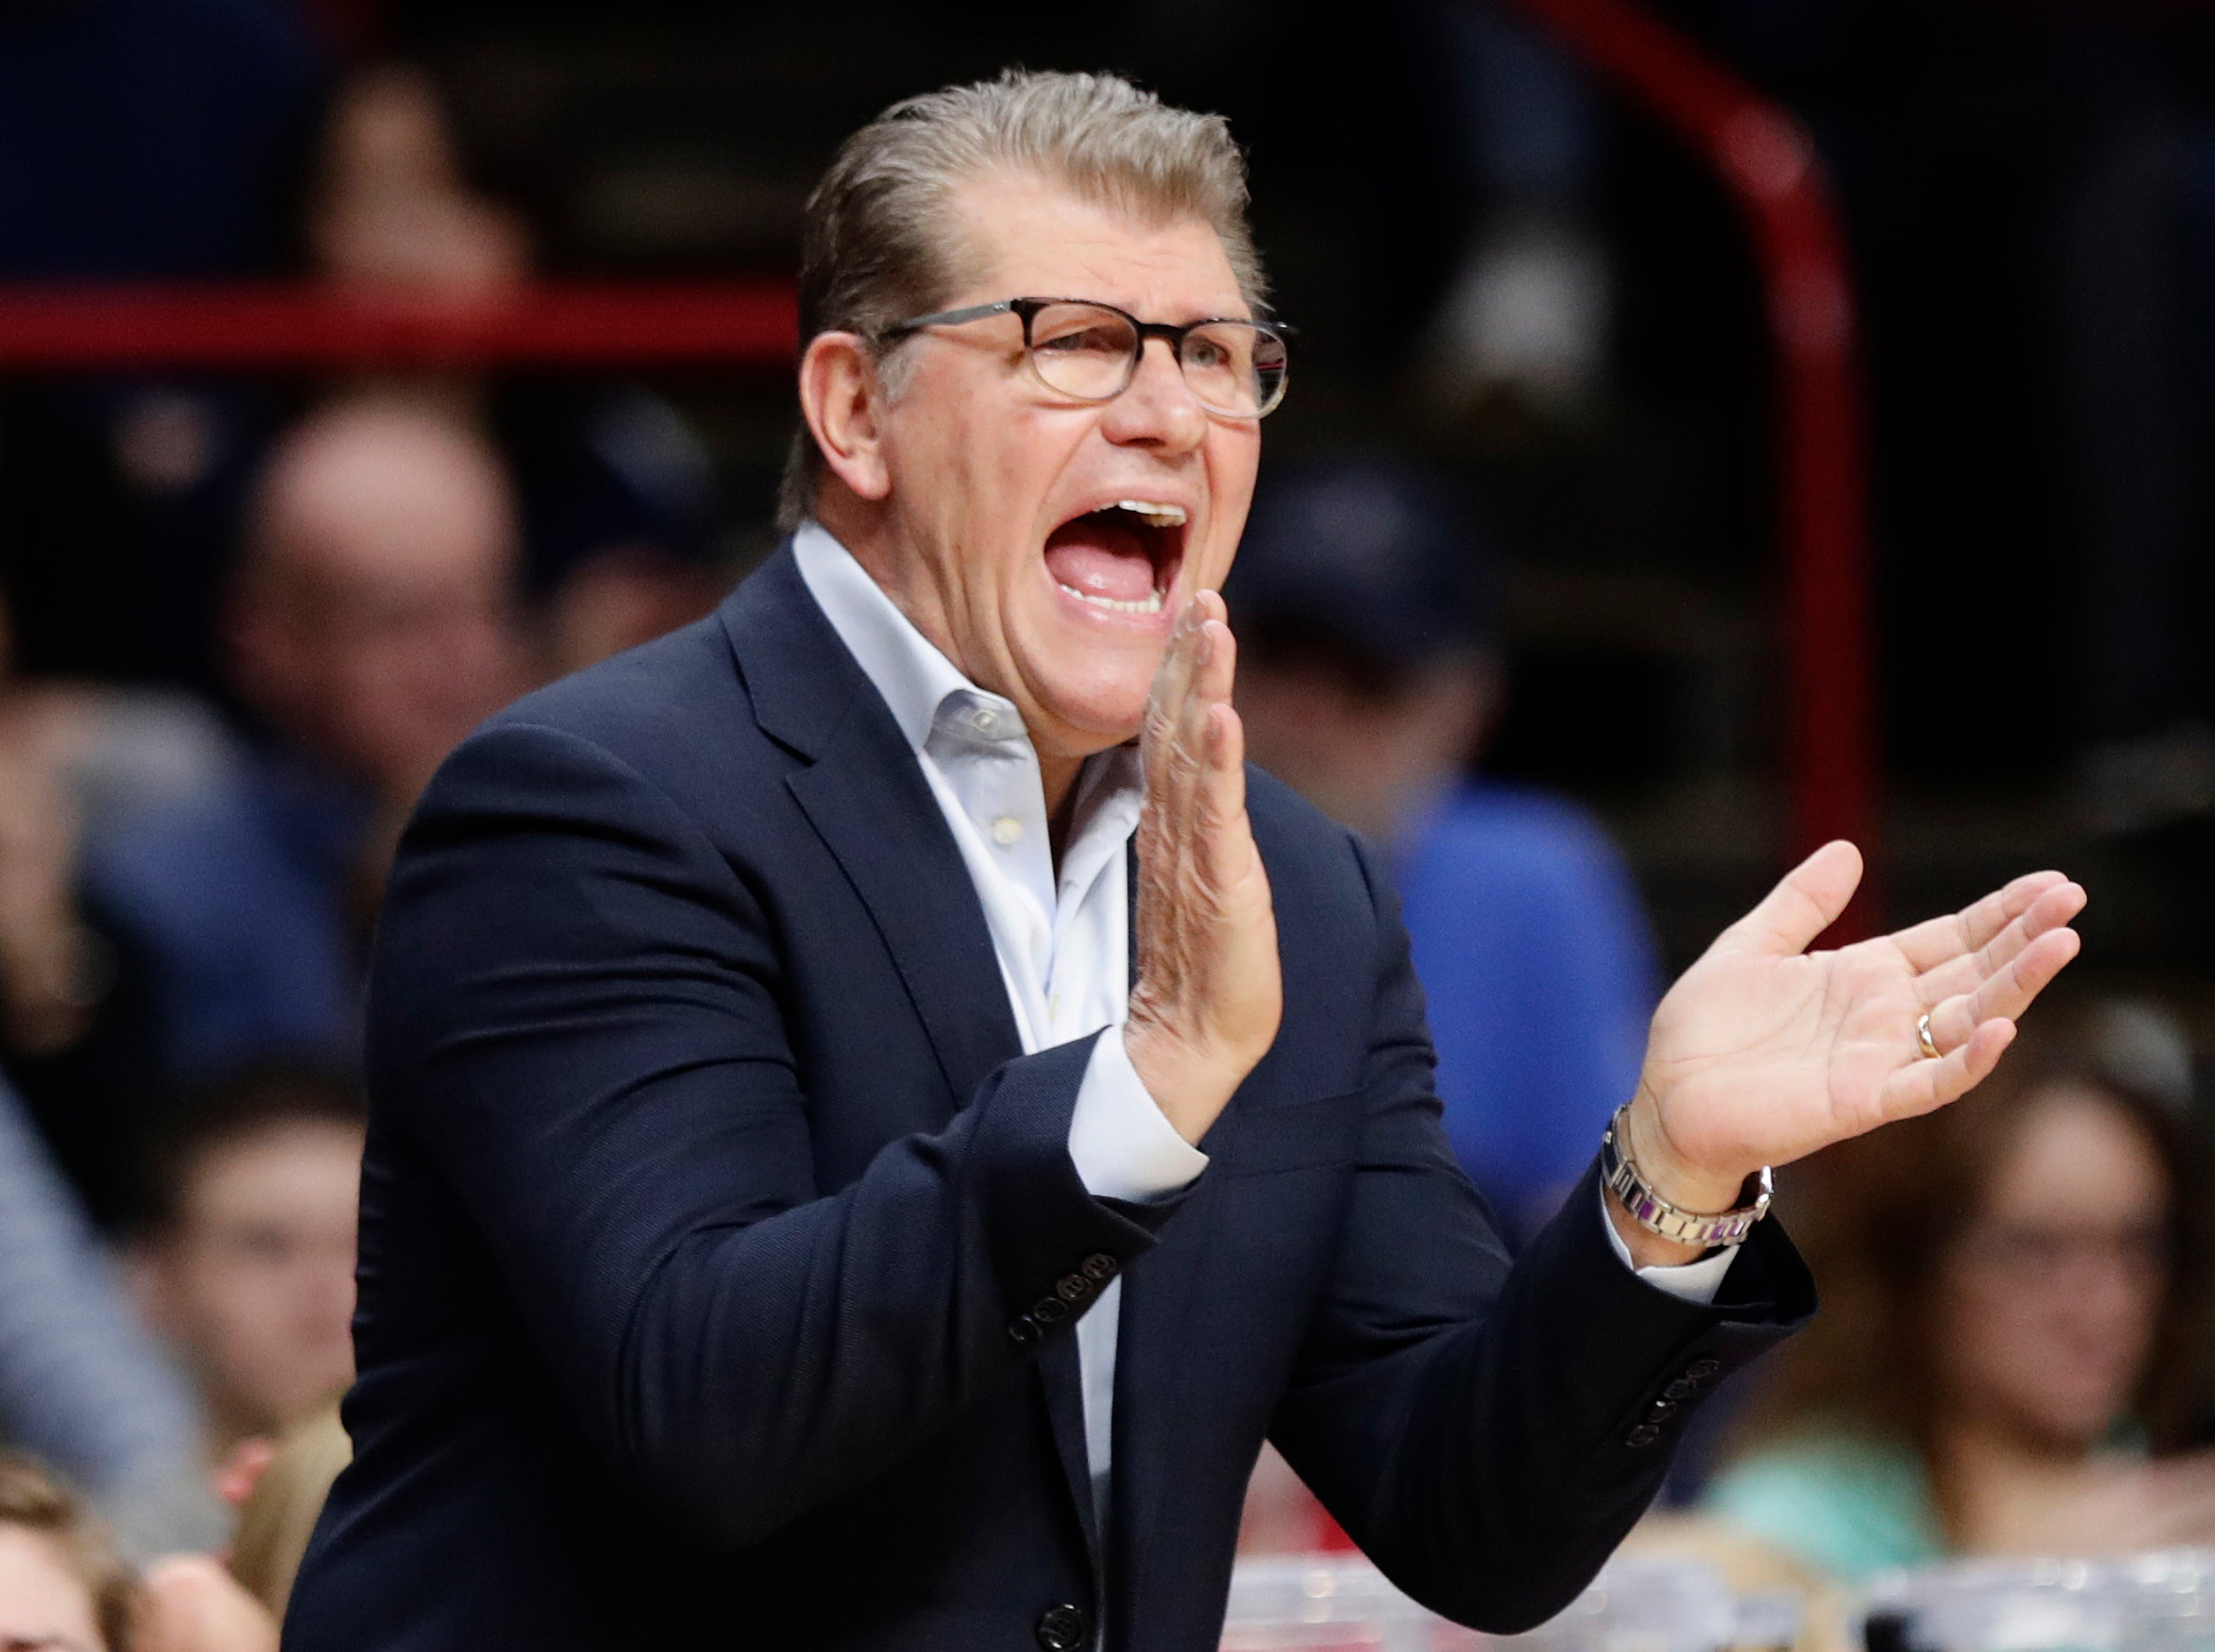 Geno Auriemma to miss 2nd consecutive game due to illness